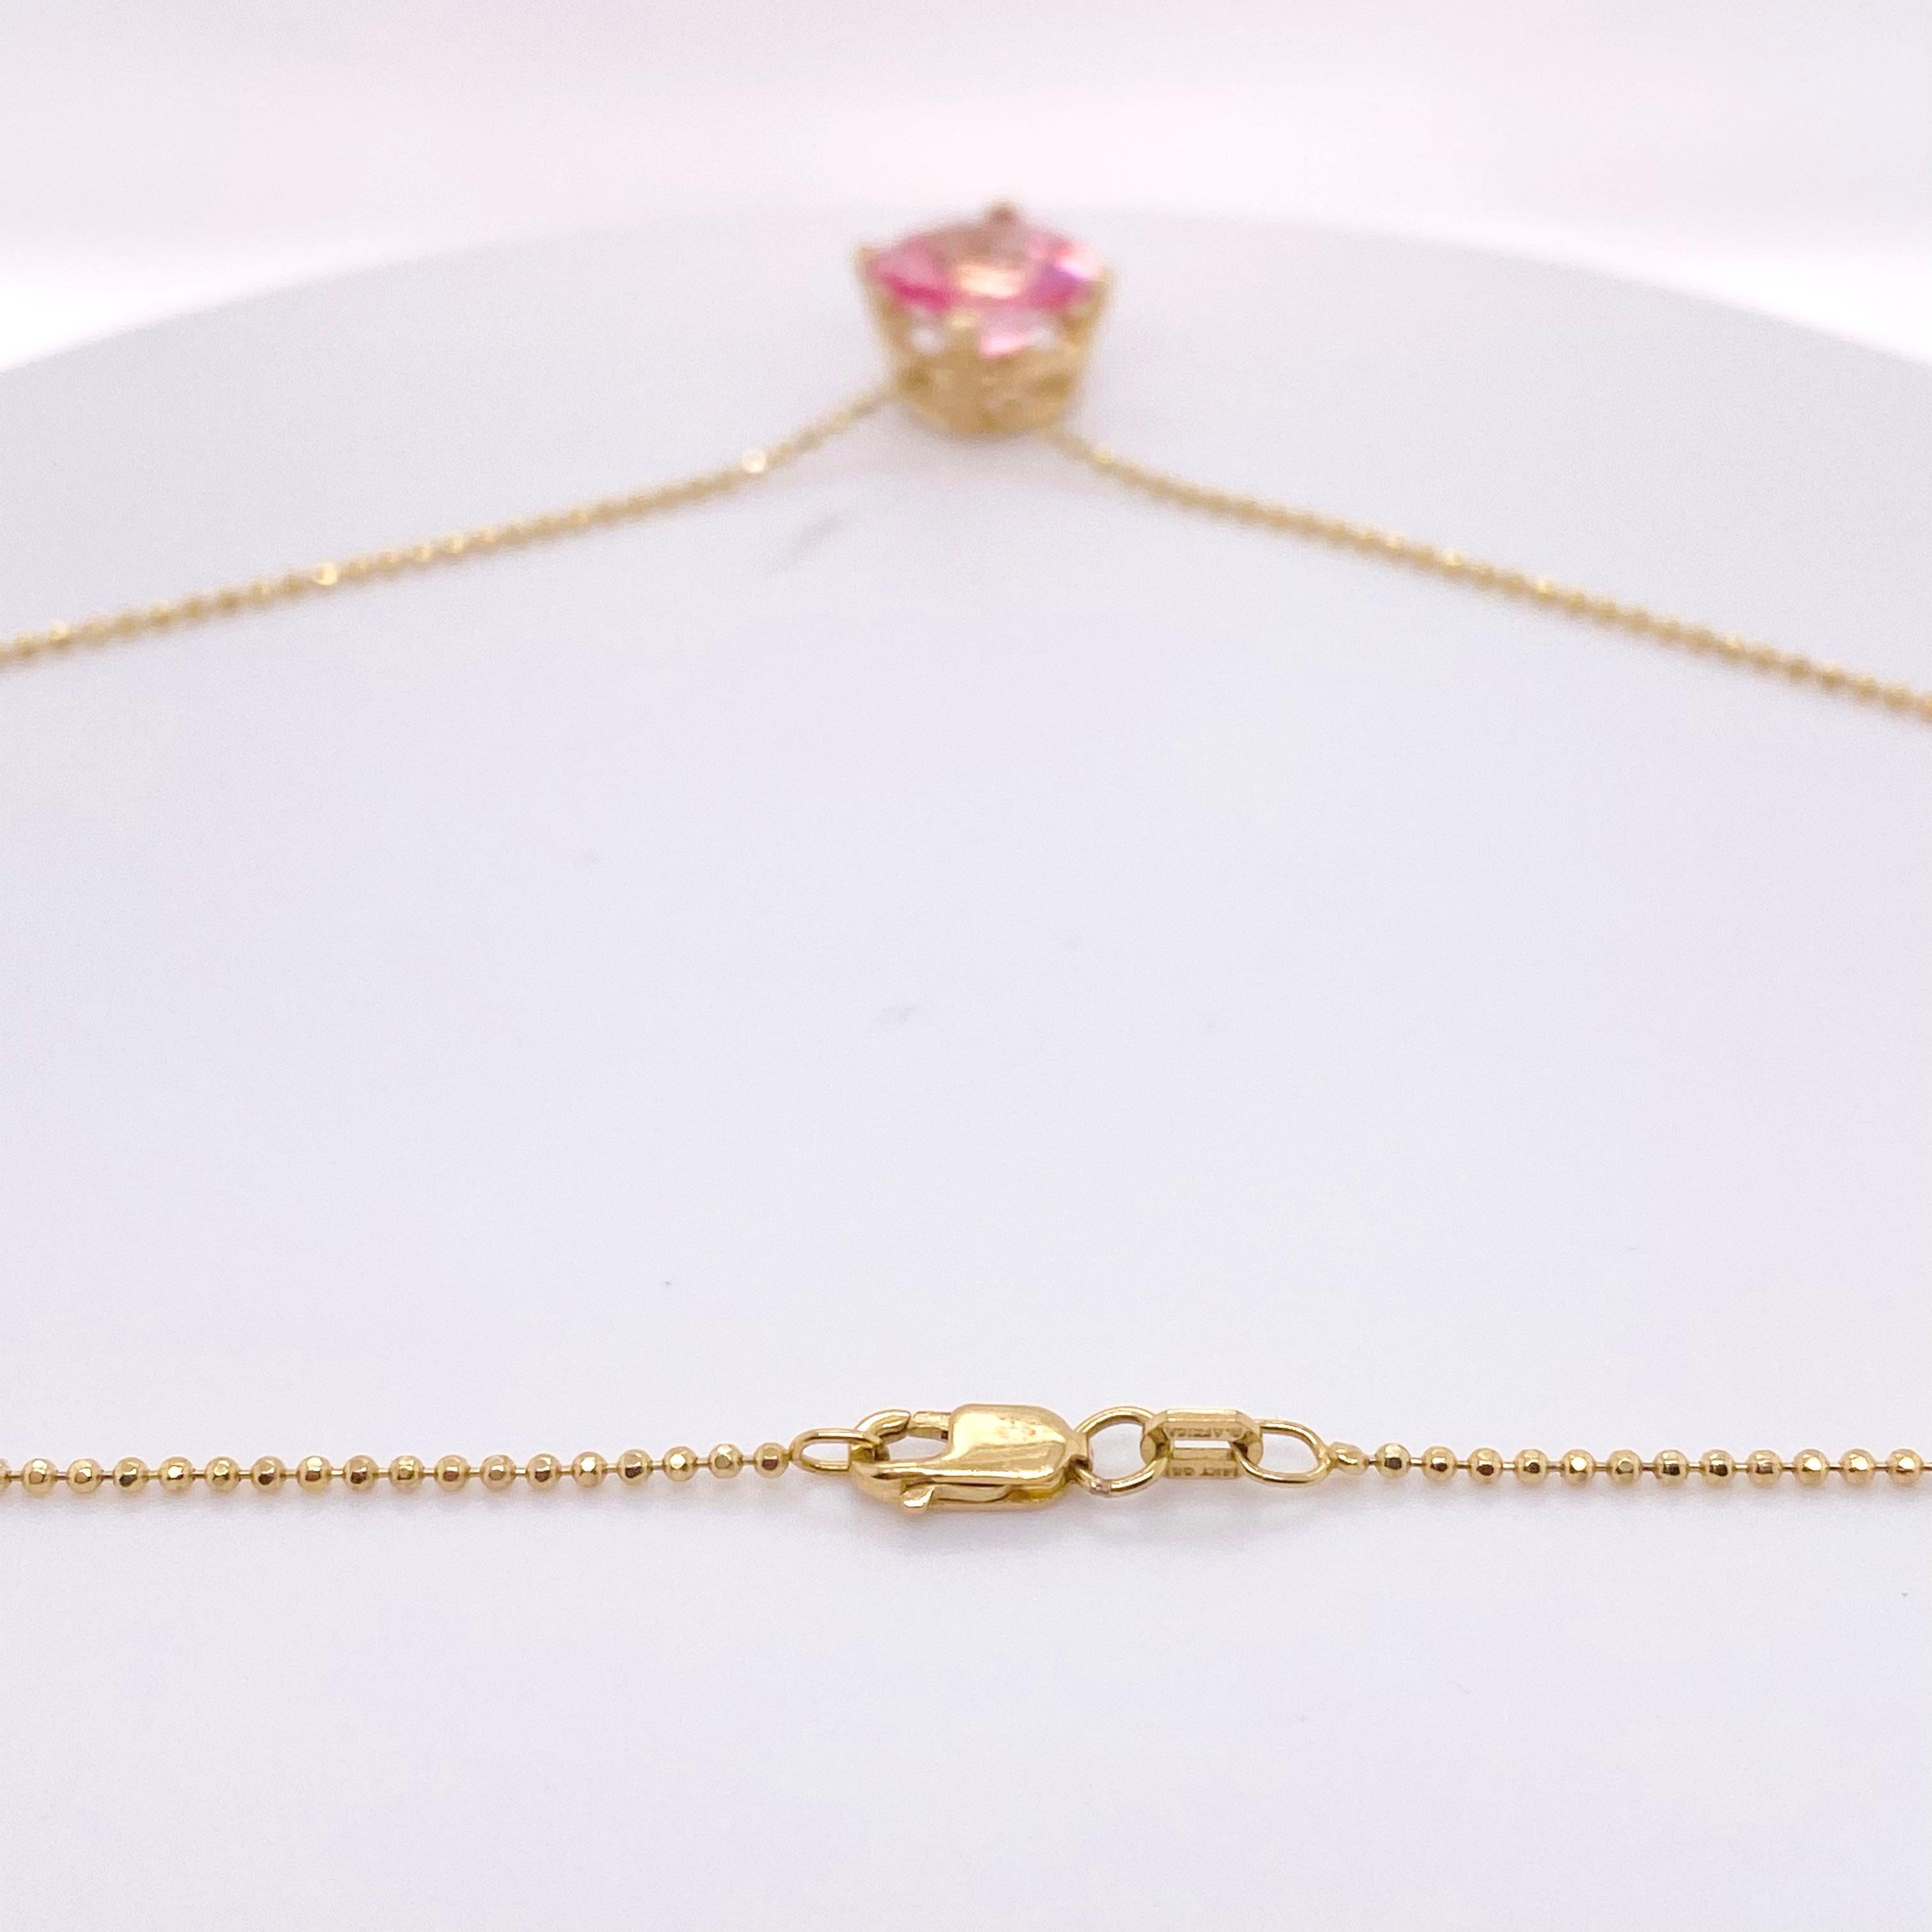 Pink Topaz Pendant w 5 Ct Cushion Yellow Gold Beaded Chain Necklace In New Condition For Sale In Austin, TX